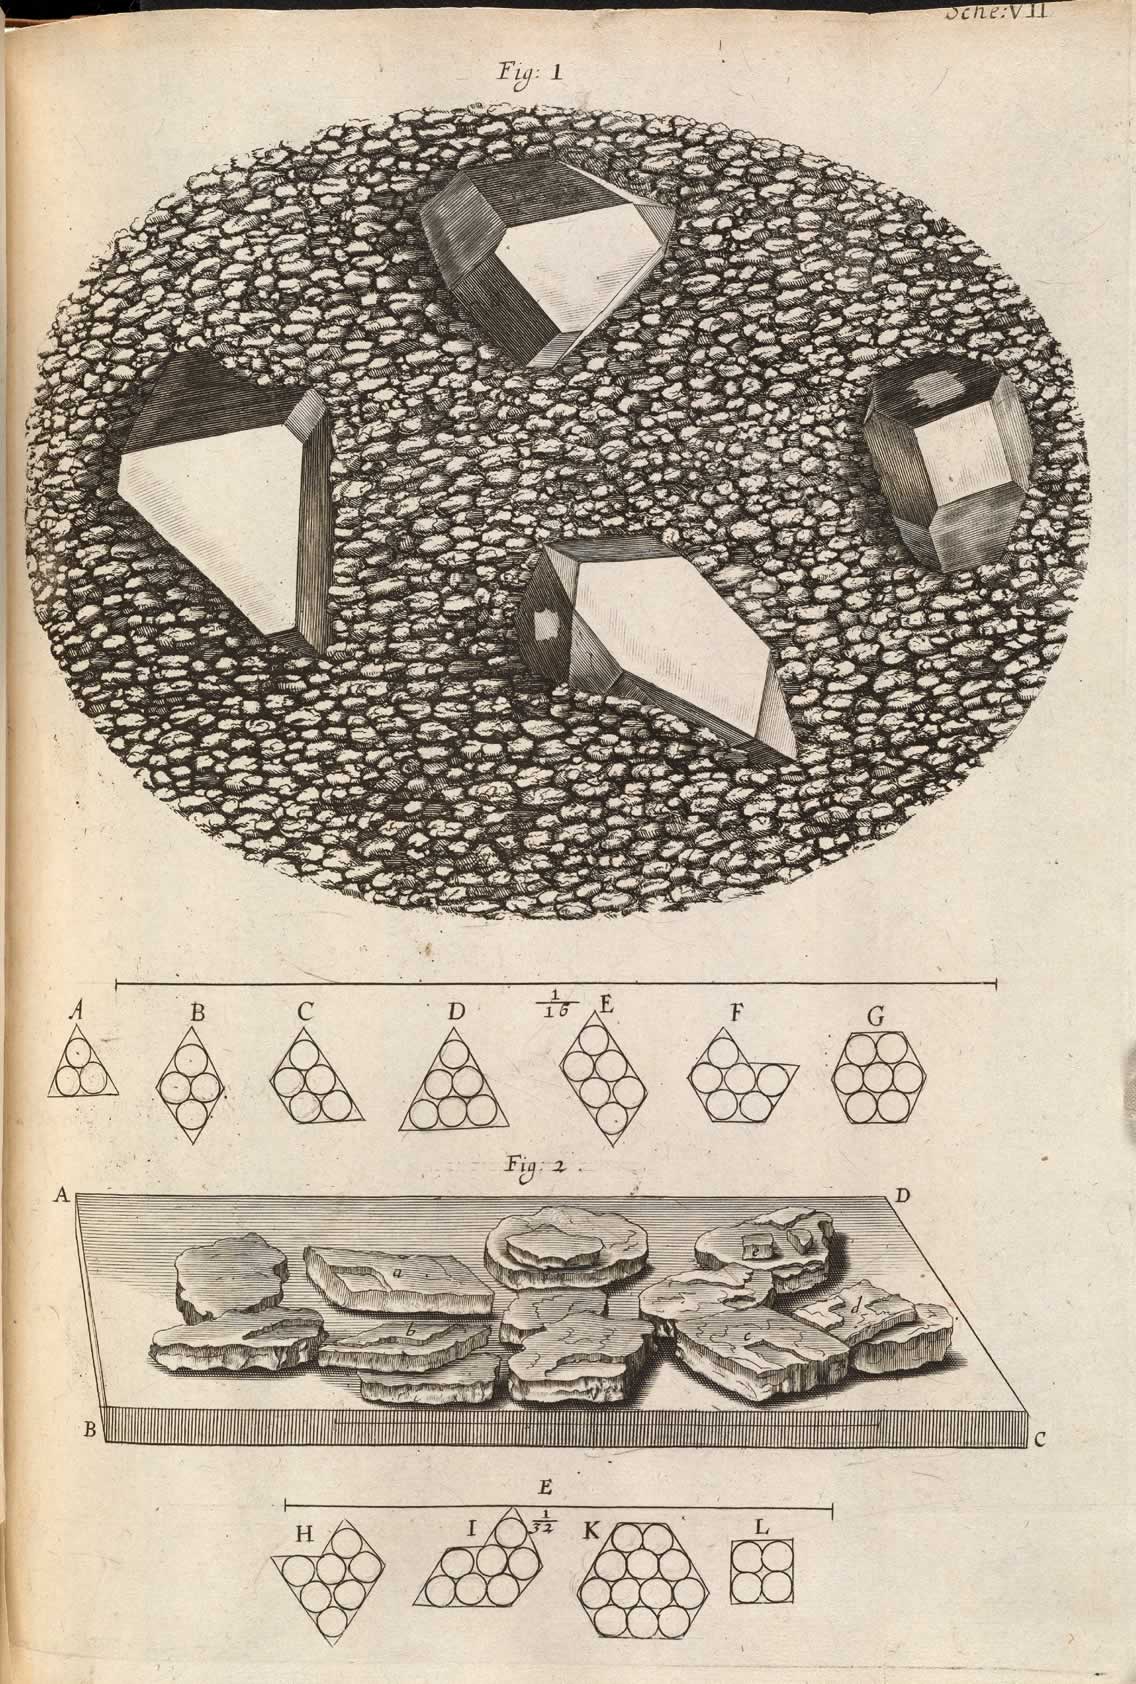 Image 2 from Micrographia by Robert Hooke